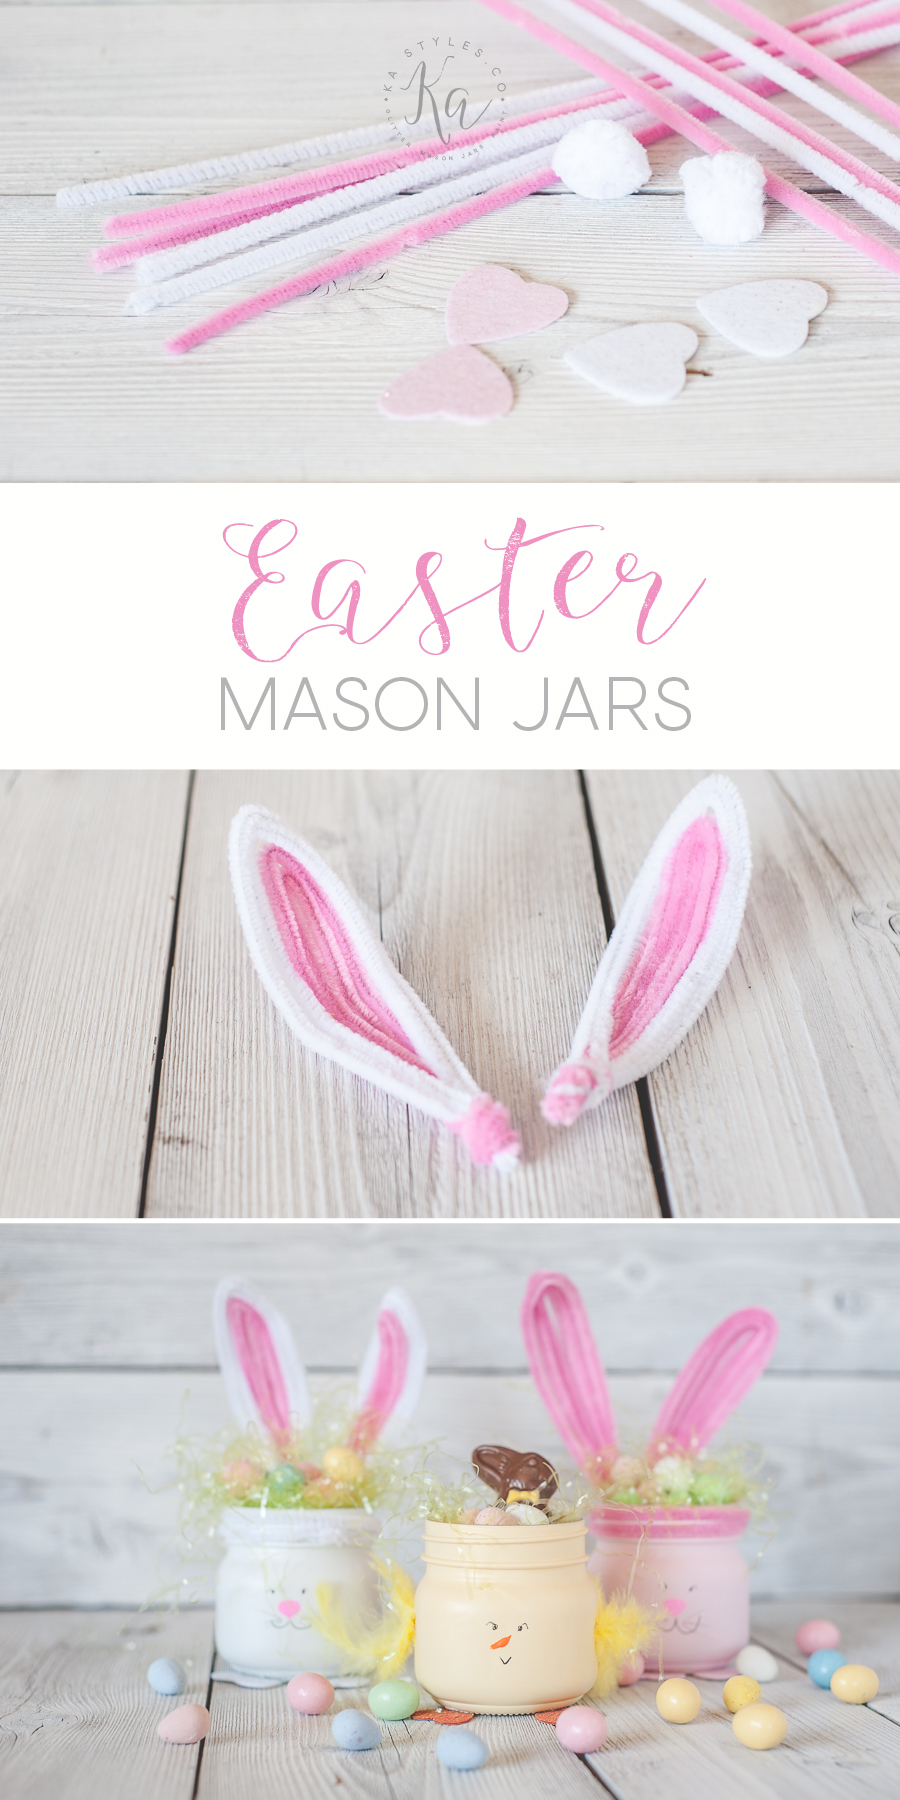 DIY Easter bunny and chic mason jars. Cute gift or decor and can make with the kids.